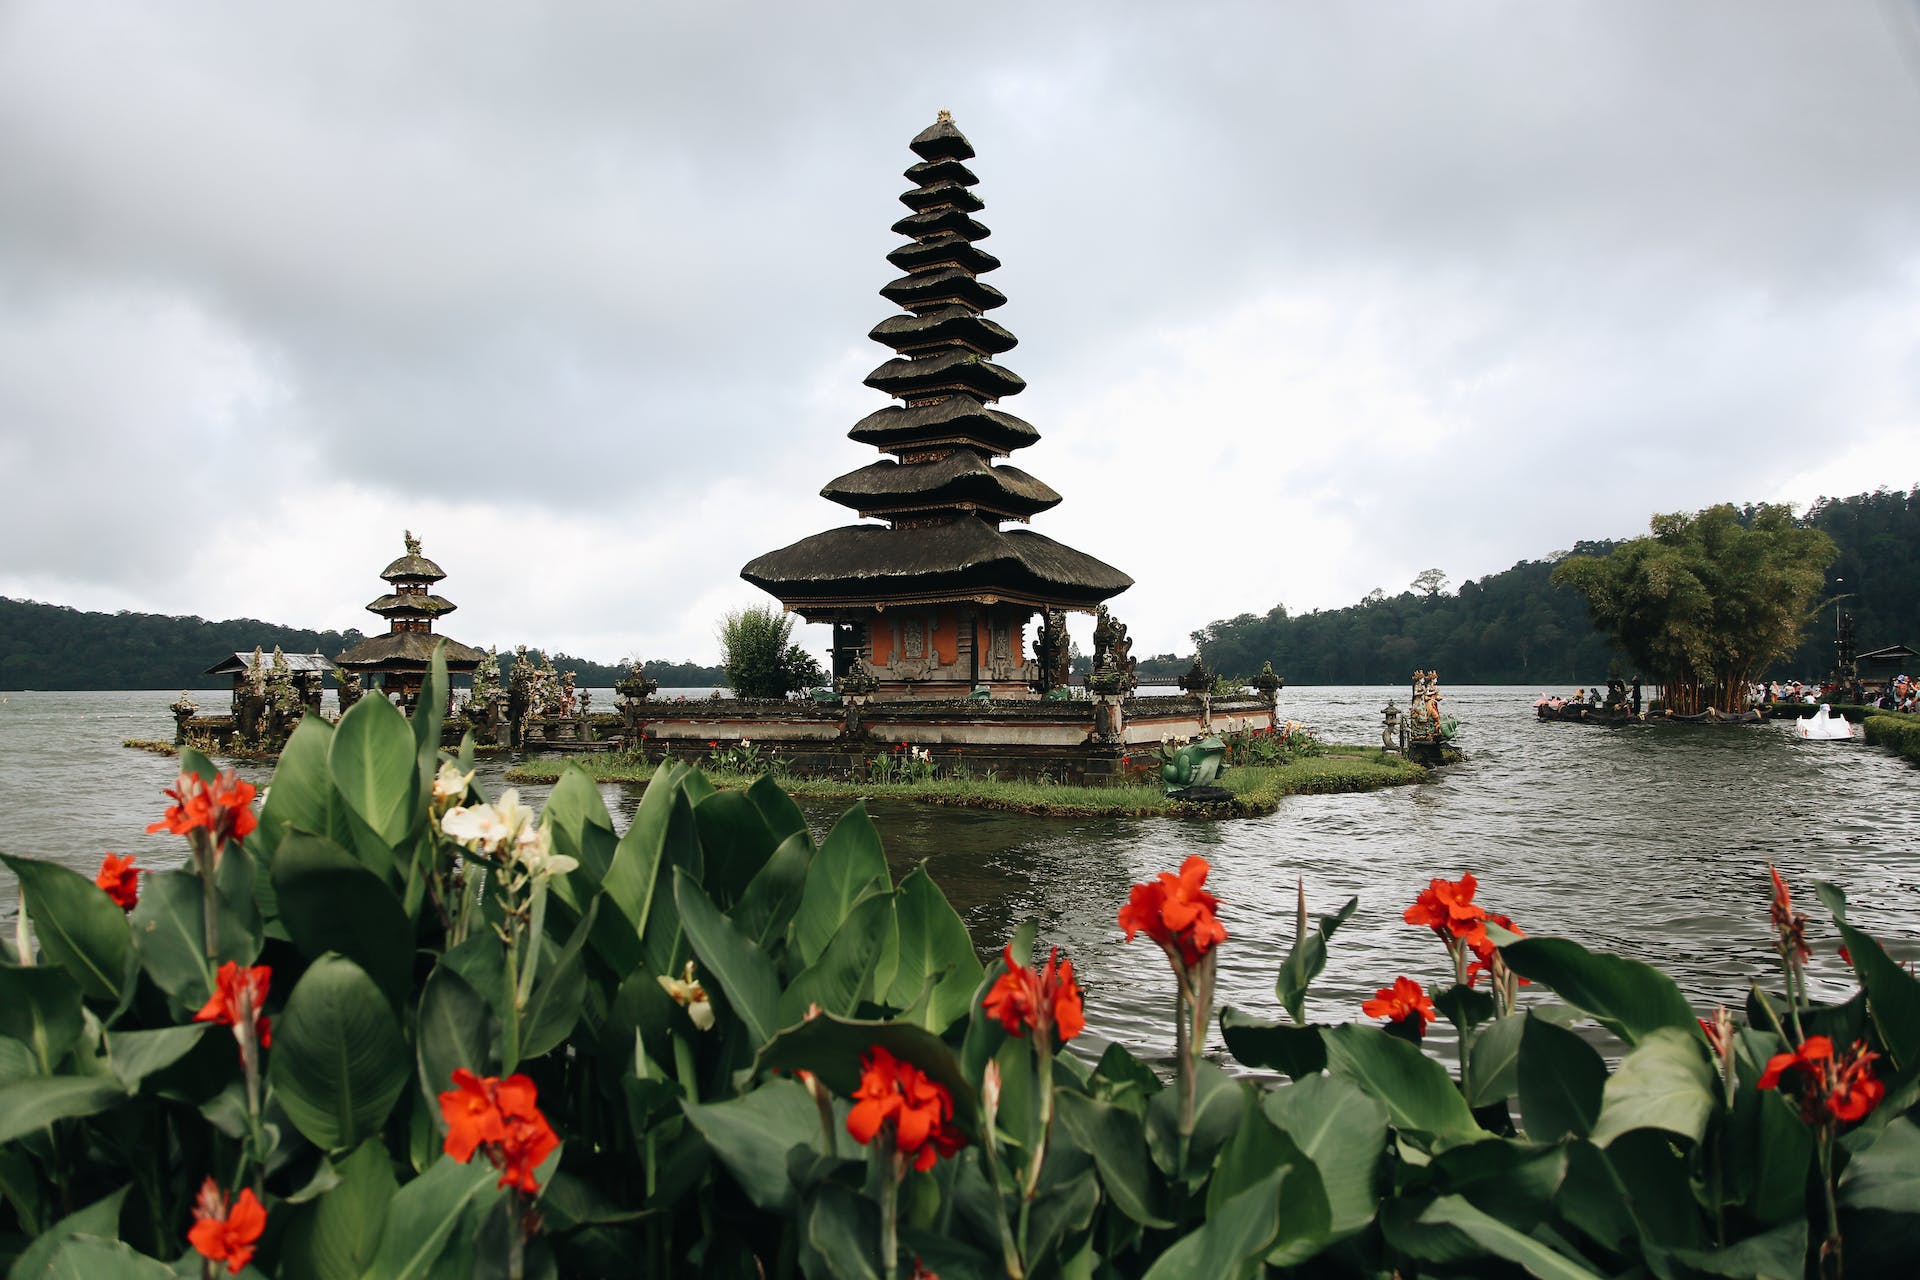 How Many Temples Does Bali Have